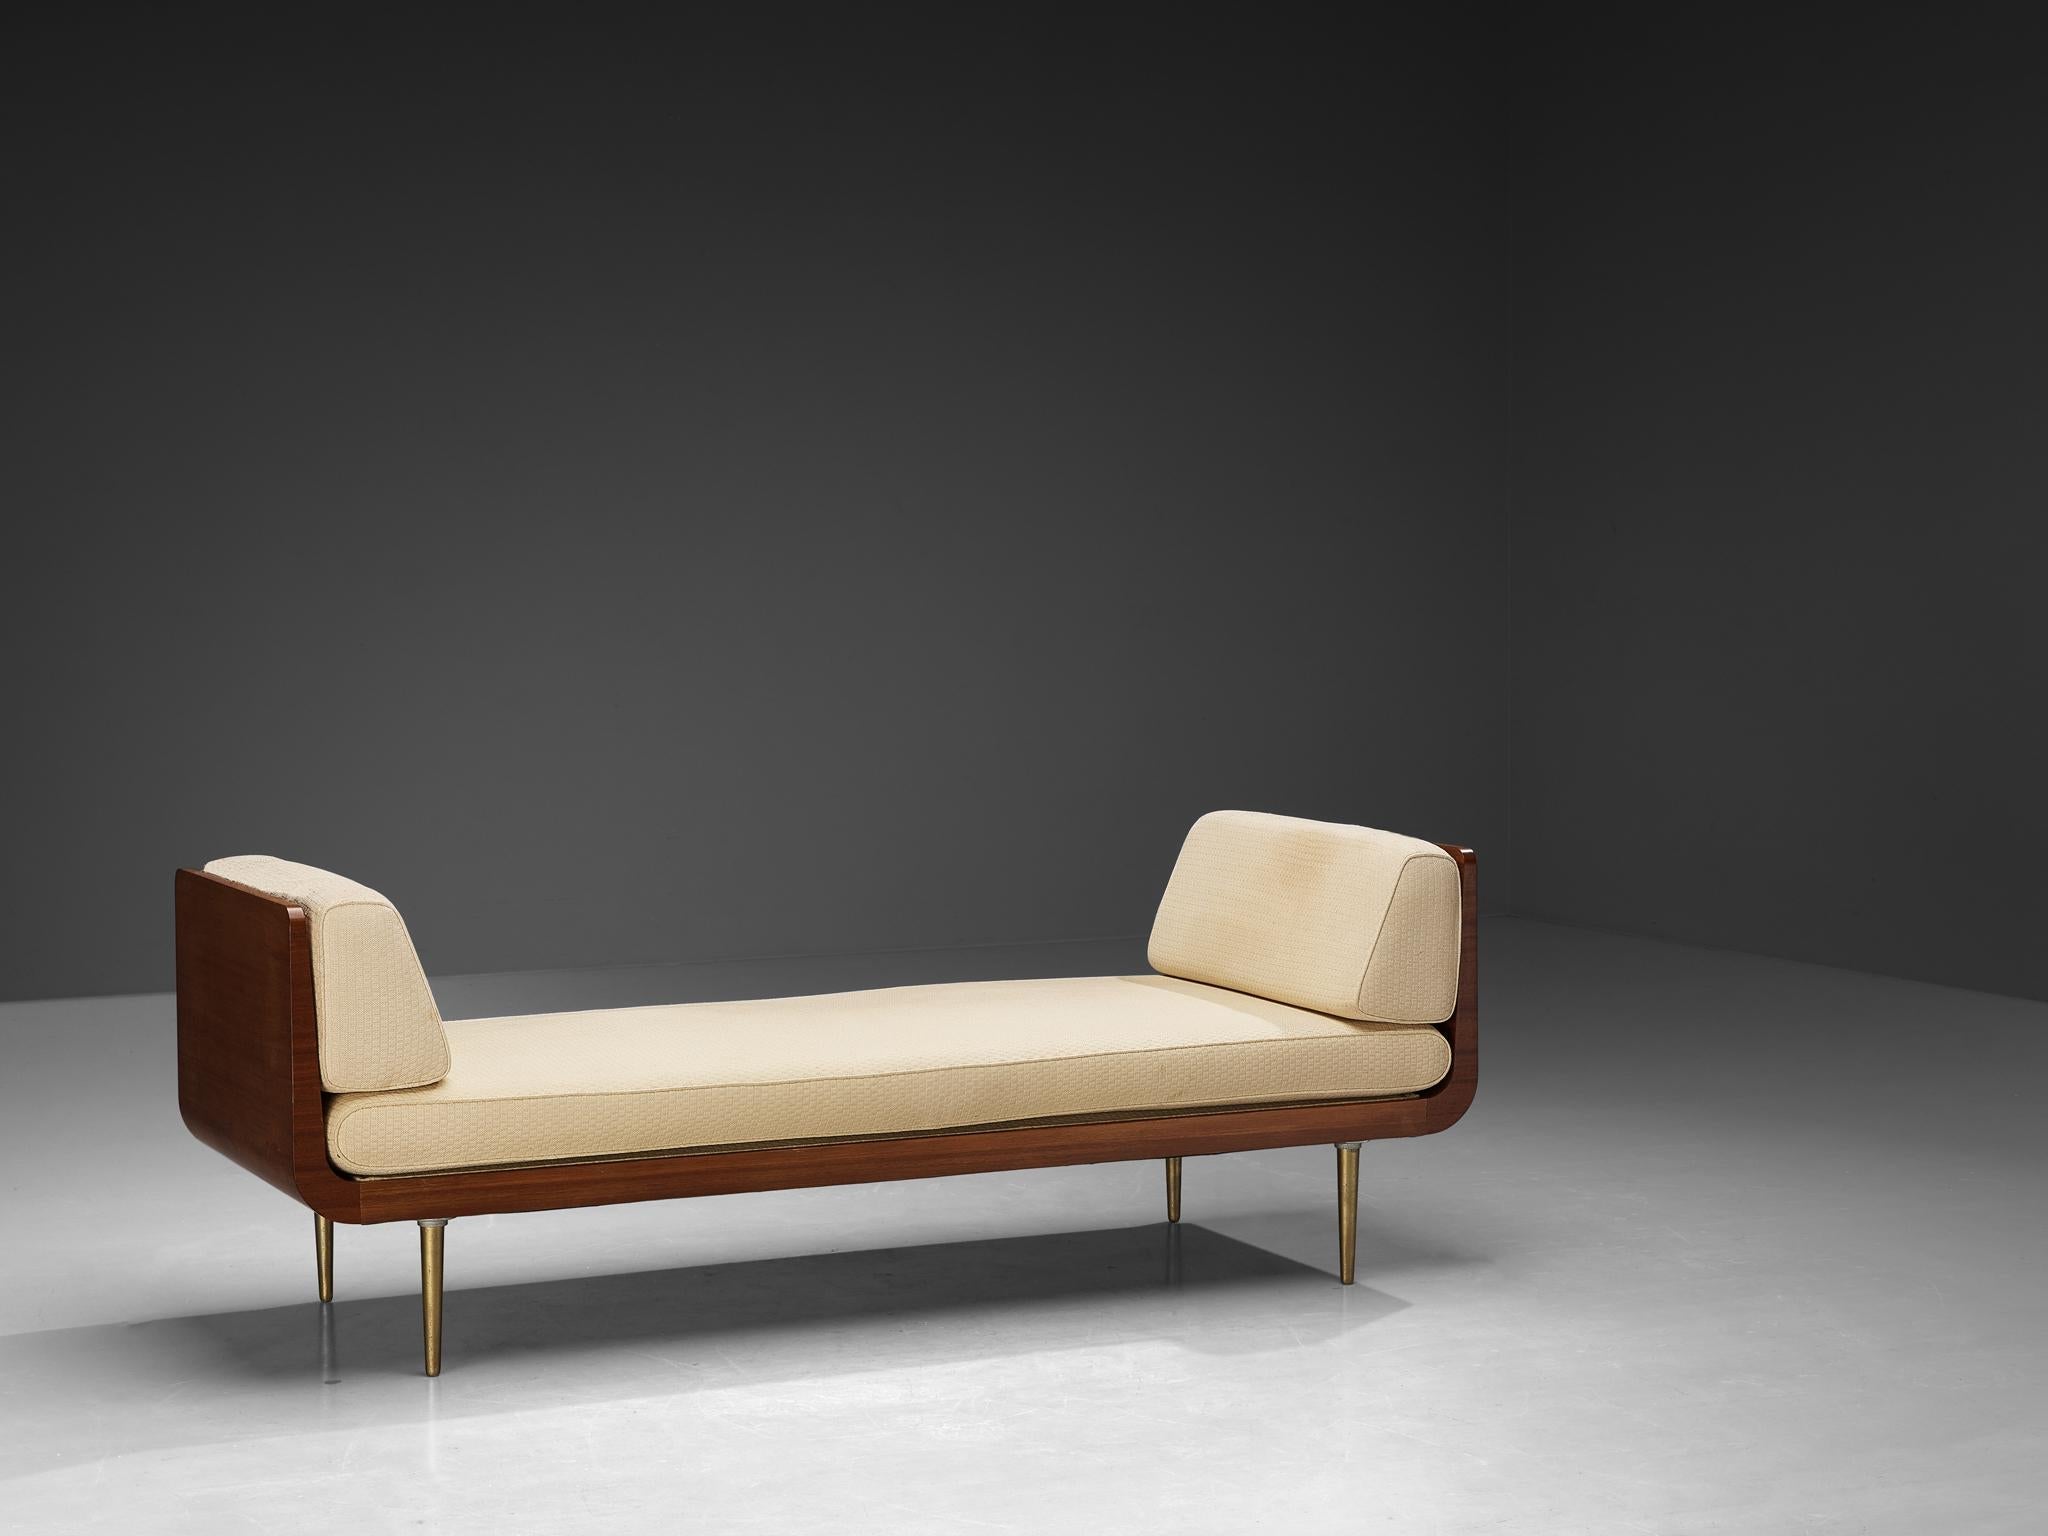 Edward Wormley Daybed in Mahogany and Beige Upholstery